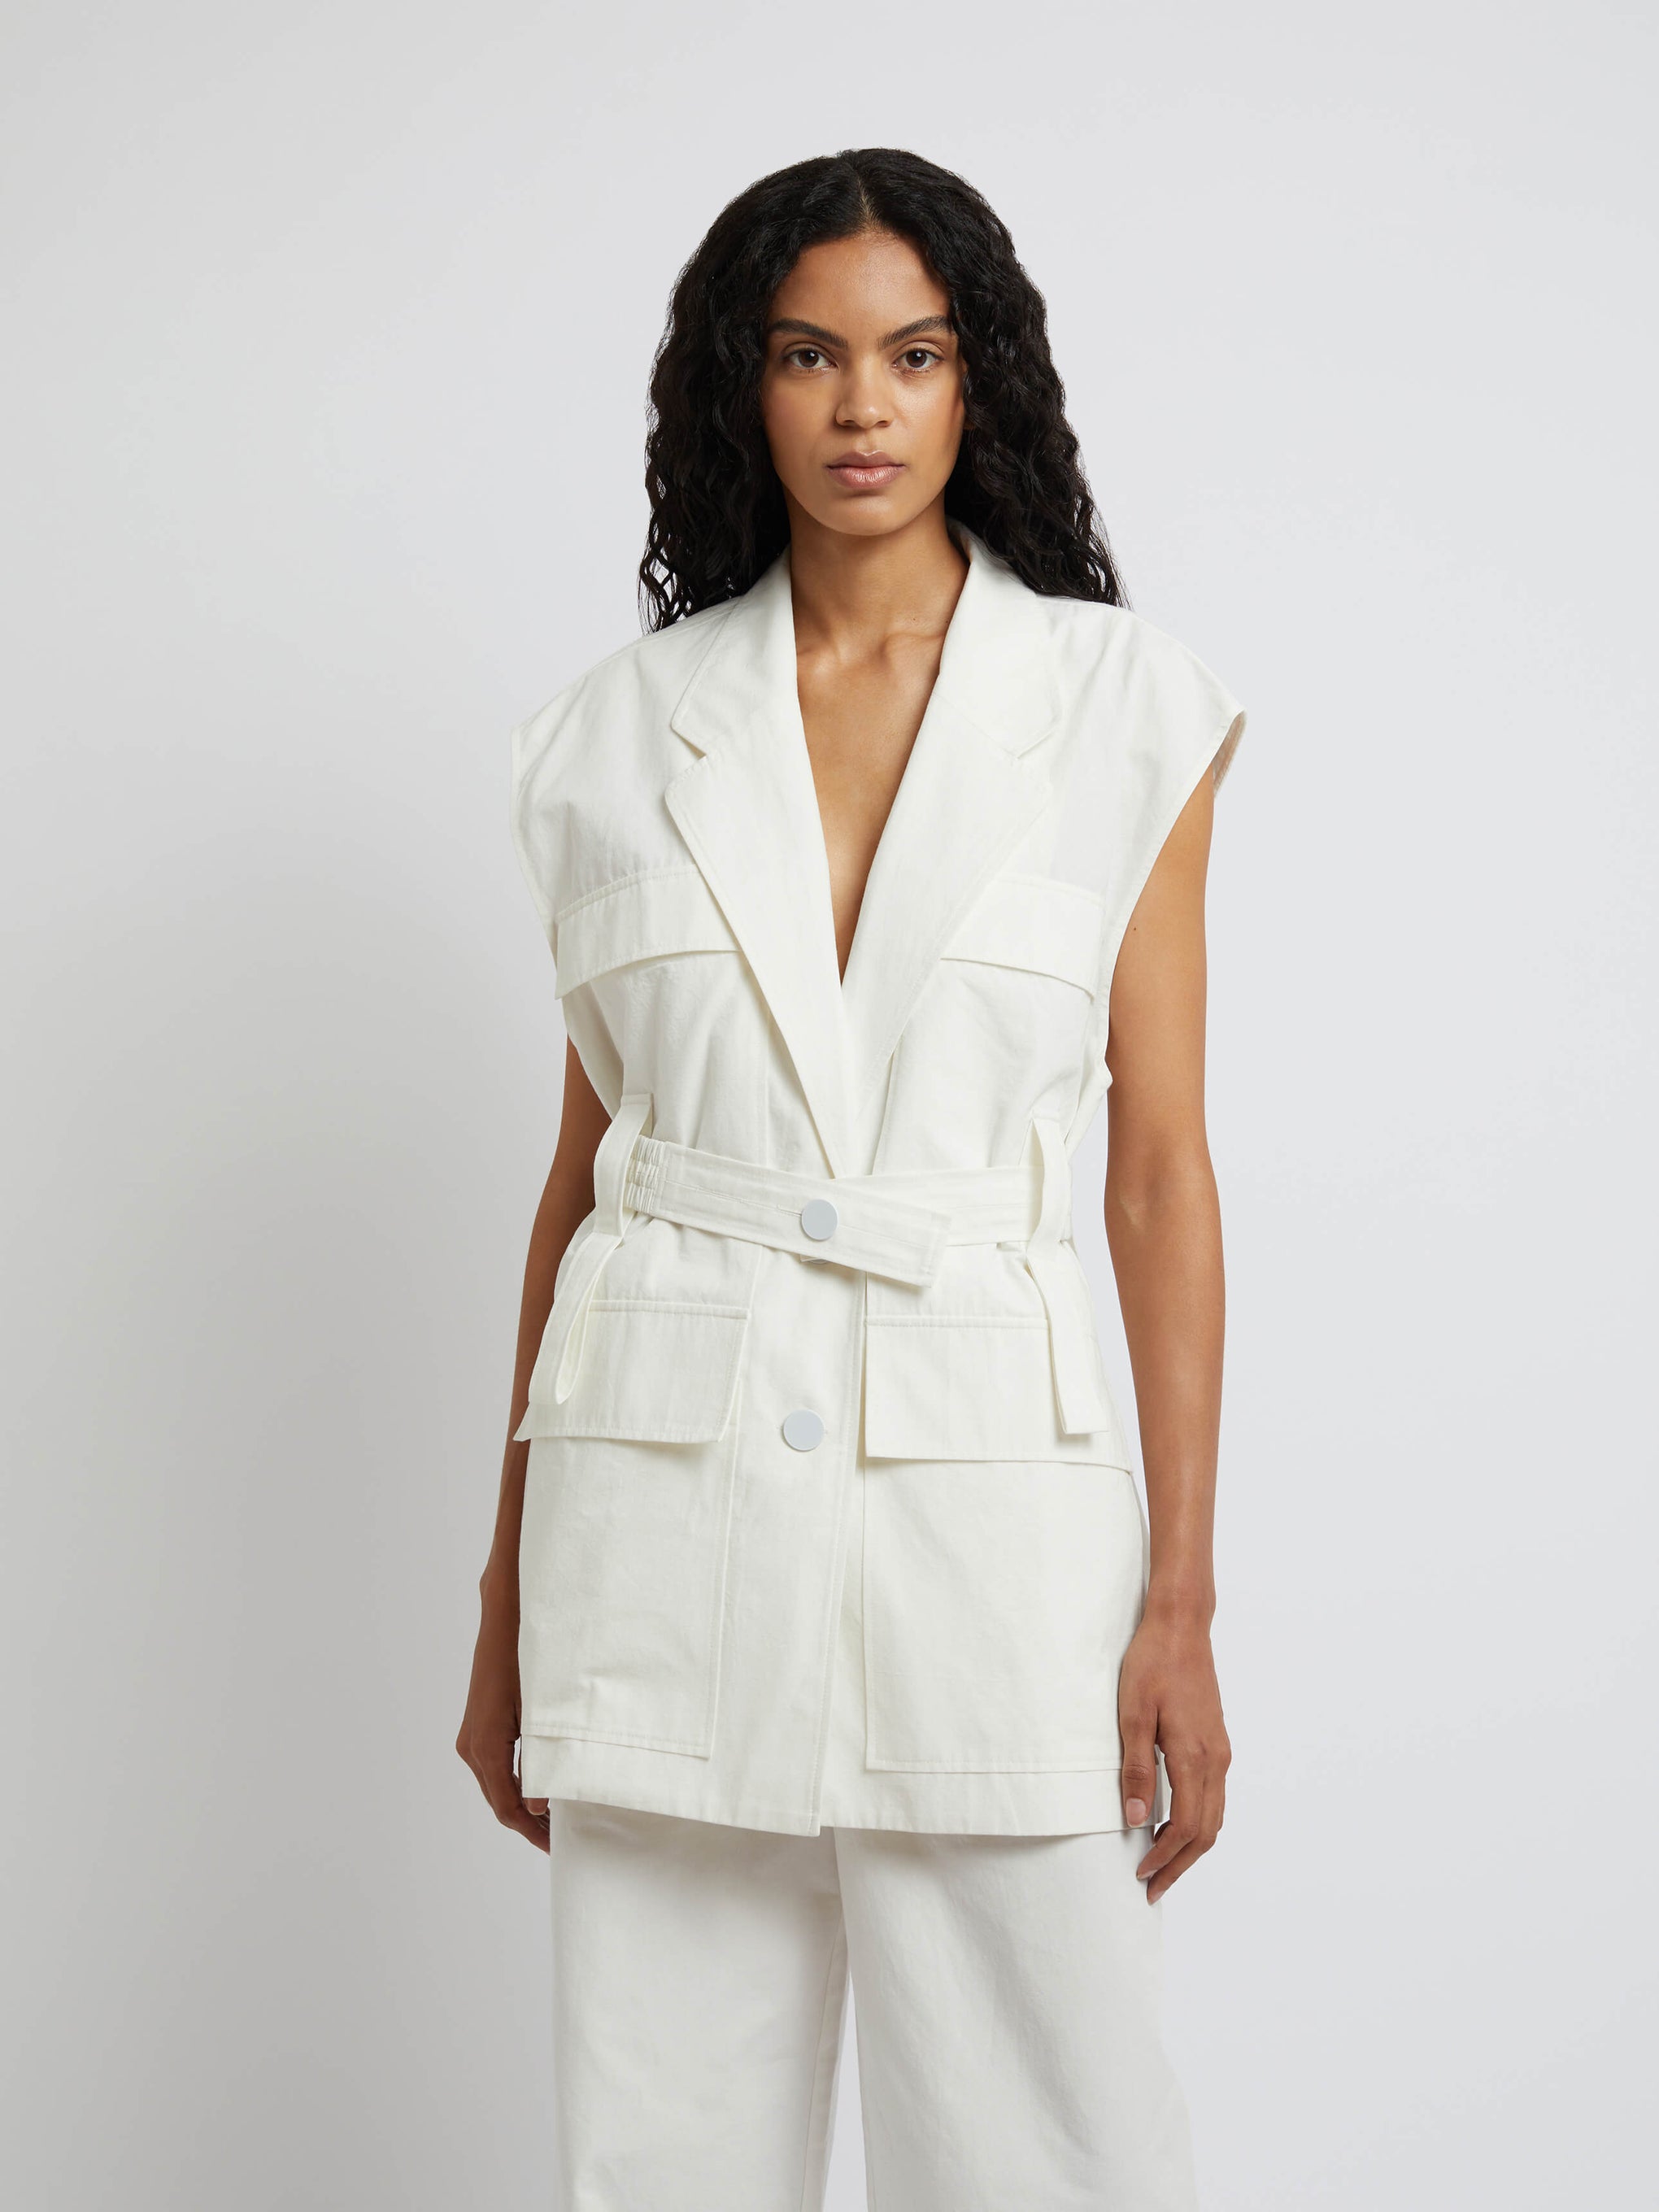 Christopher Esber Sleeveless Belted Jacket in White available at TNT The New Trend Australia.